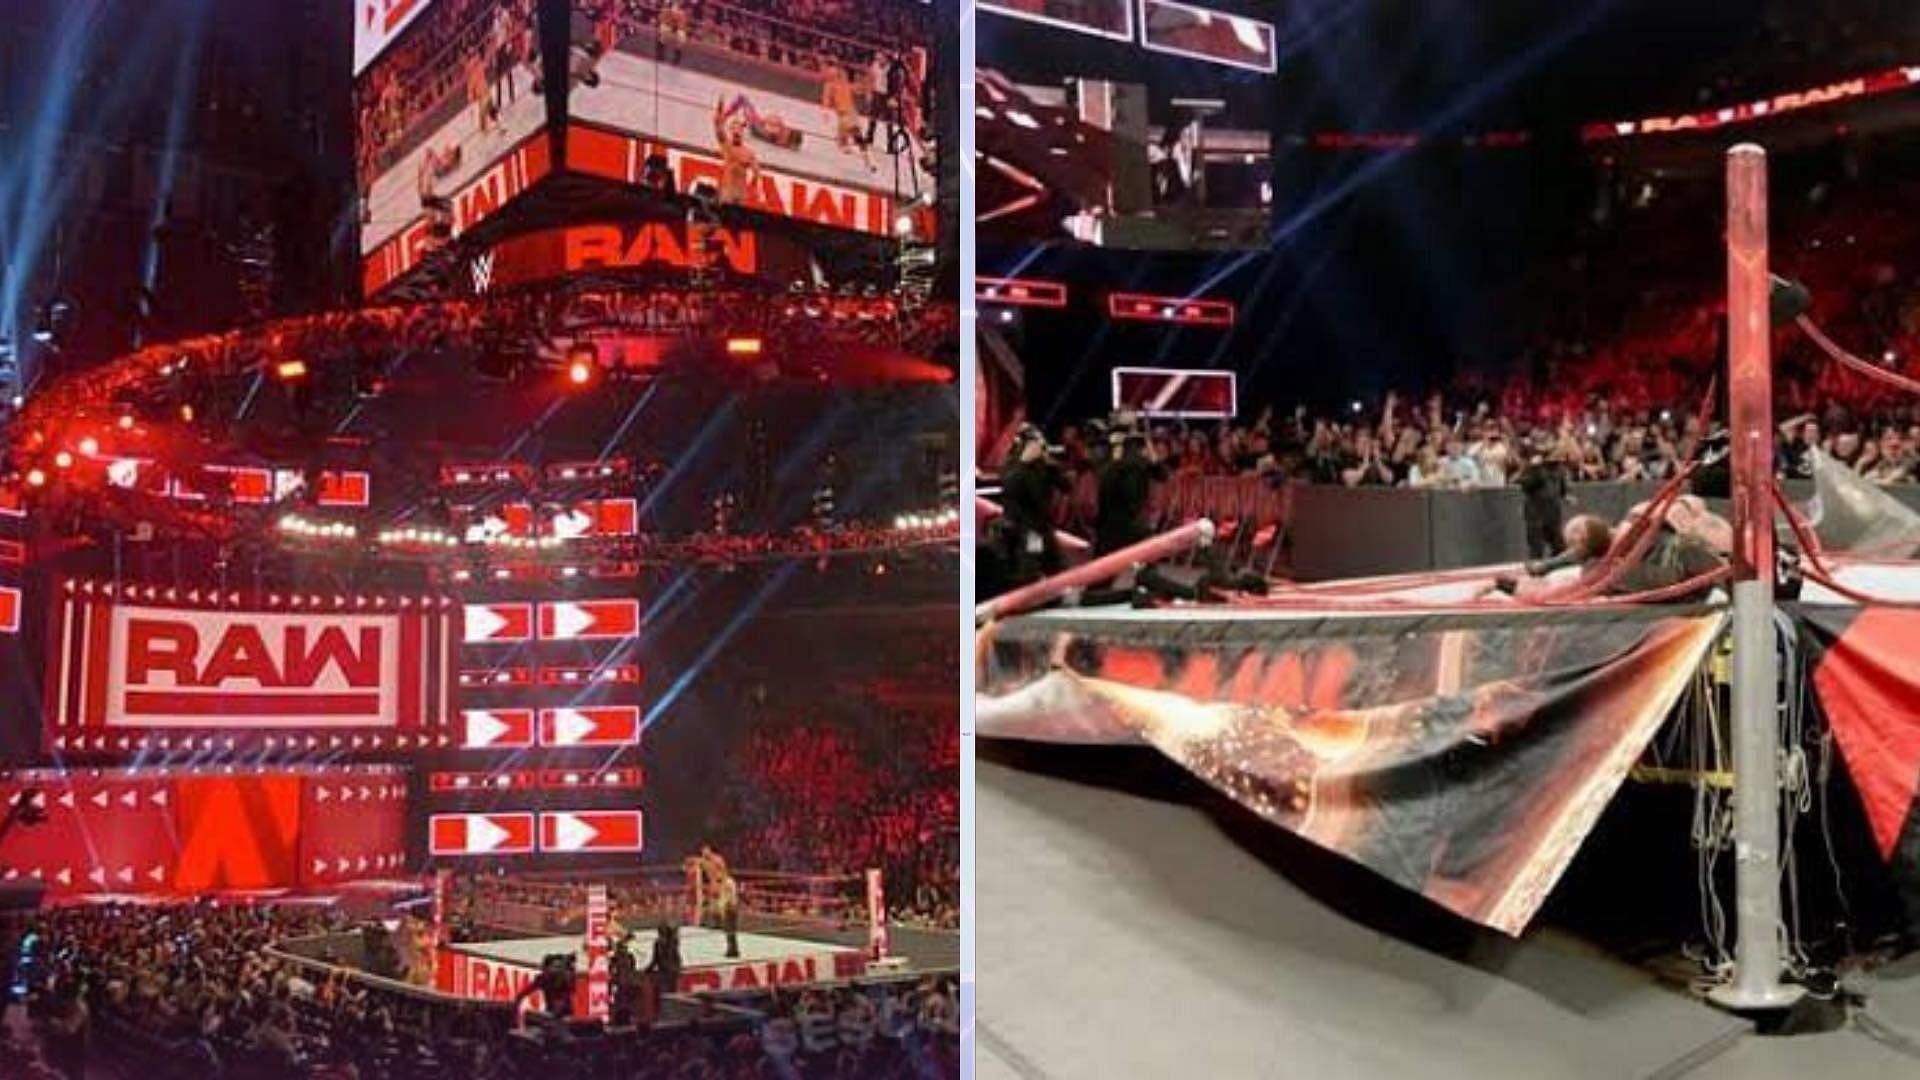 WWE RAW this week was live from the Rocket Mortgage Fieldhouse in Cleveland, Ohio